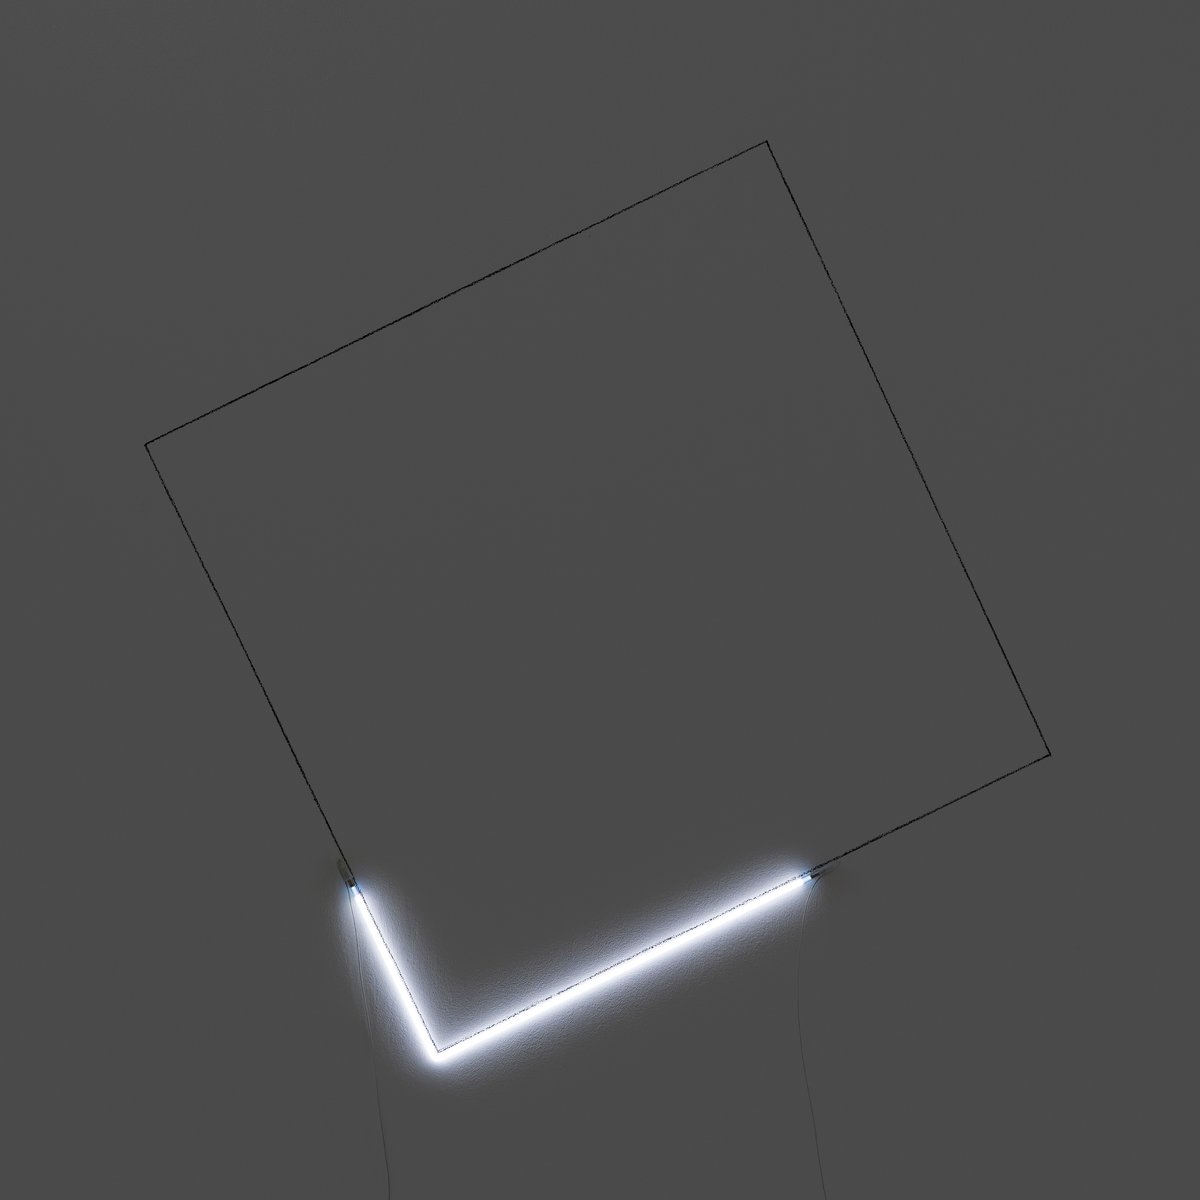 one square on light